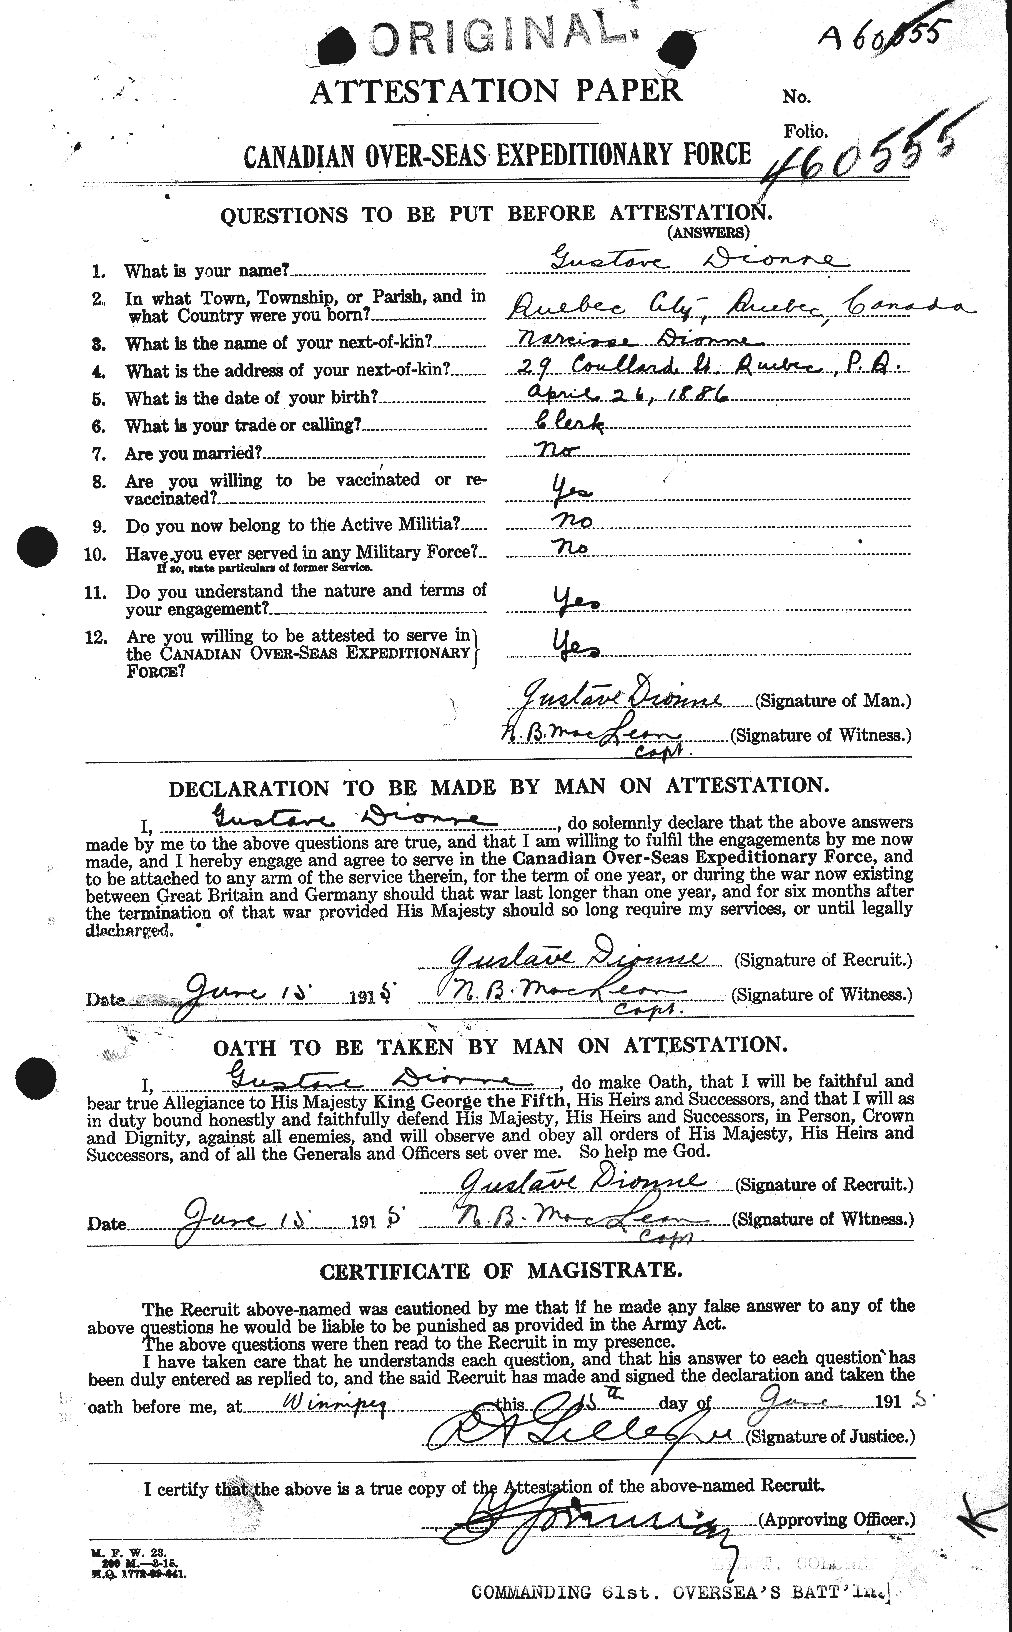 Personnel Records of the First World War - CEF 292610a